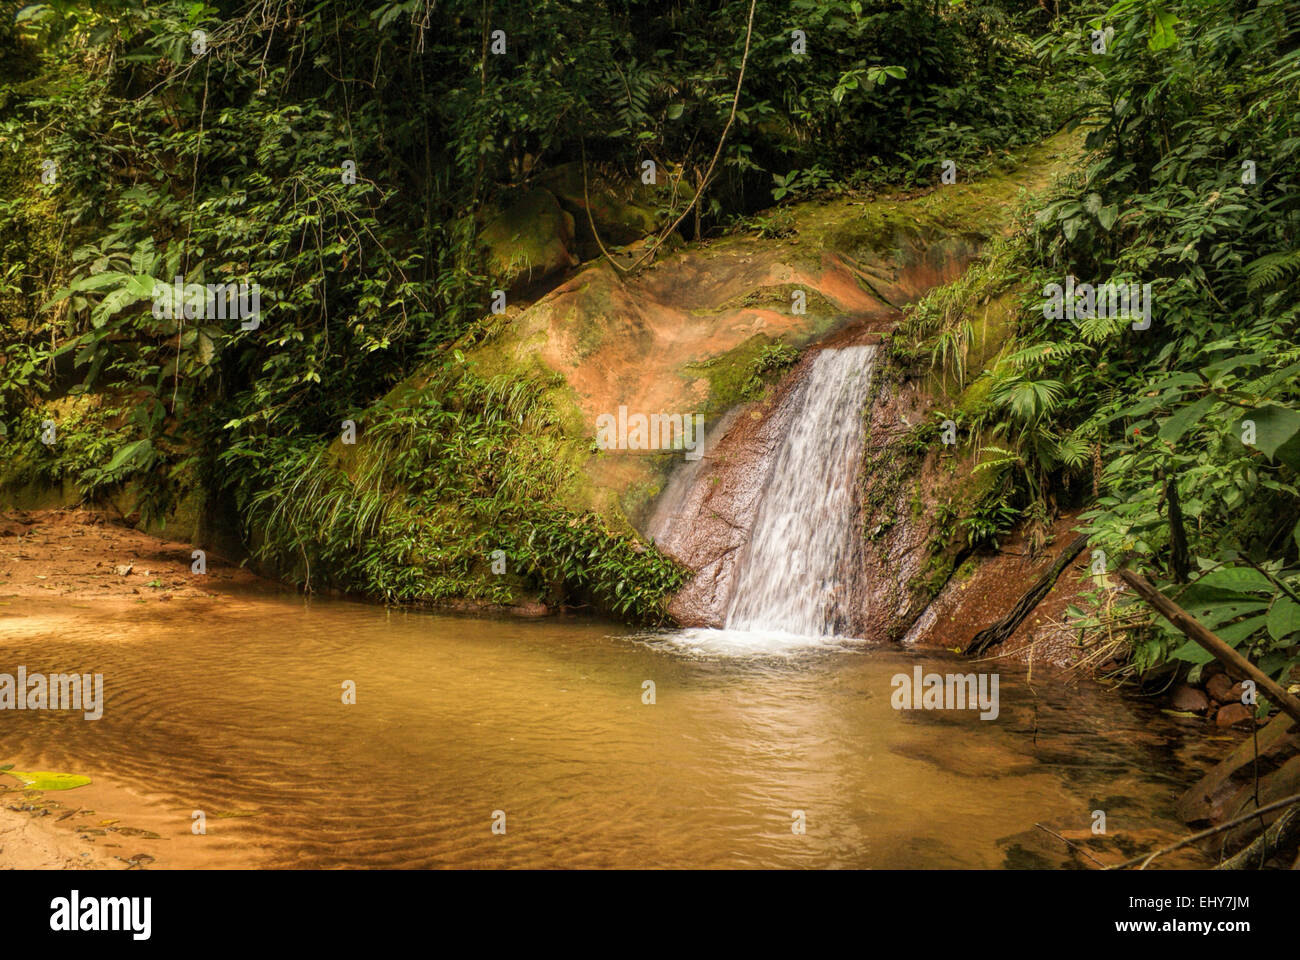 Water cascade in Bolivian jungle forest Stock Photo